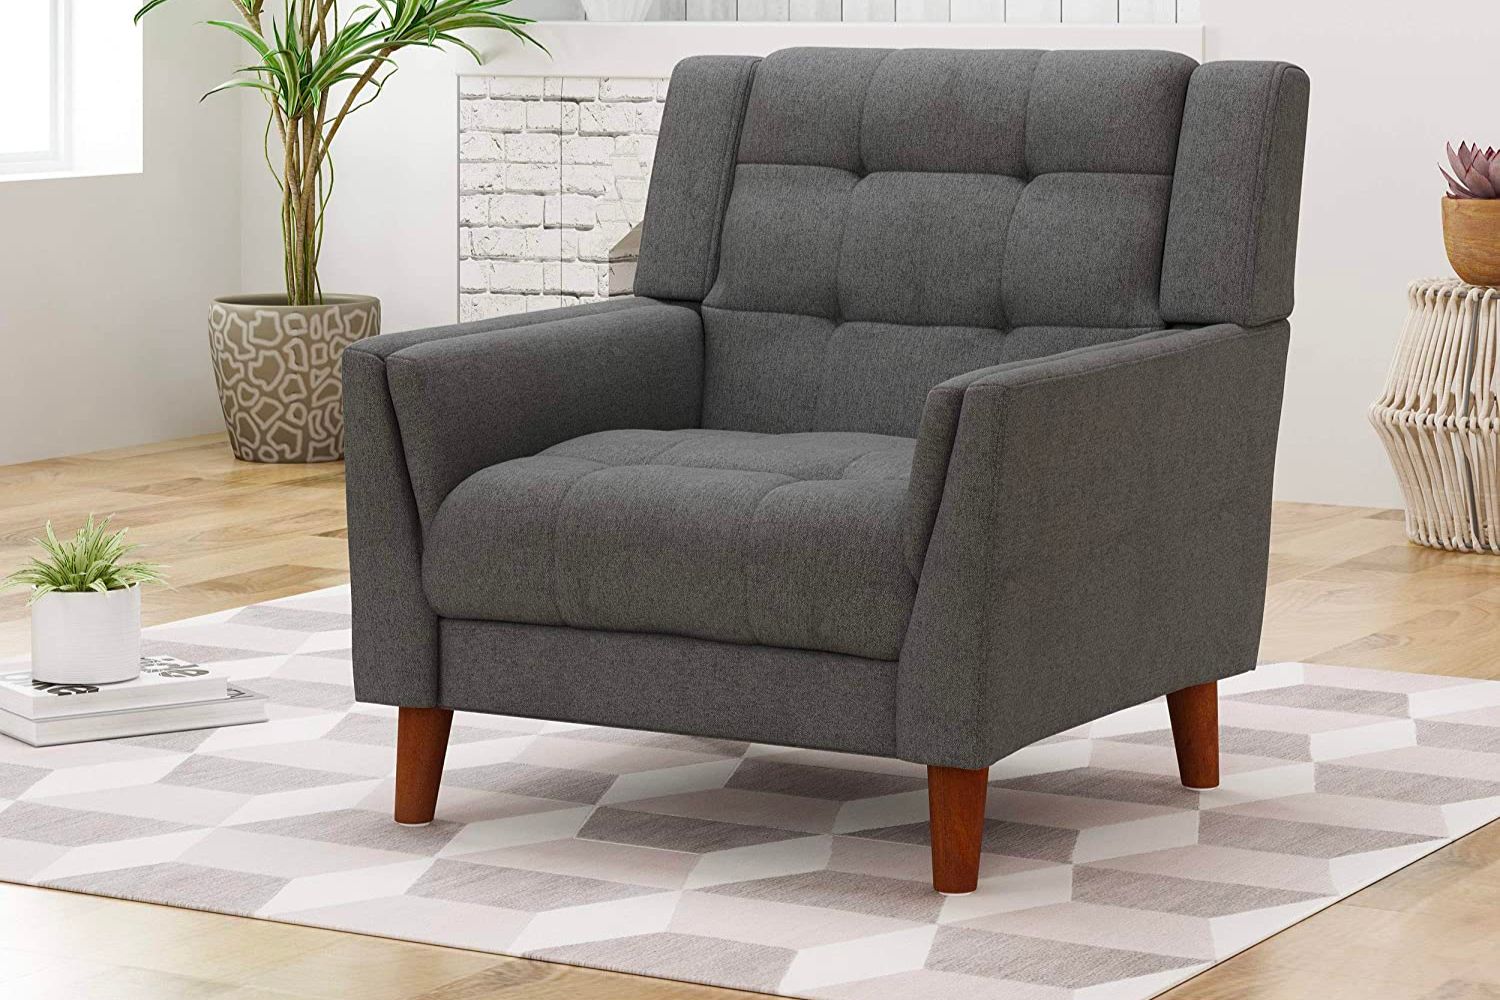 Deals Roundup Cyber Monday Furniture 11/29: Christopher Knight Home Evelyn Mid Century Modern Fabric Arm Chair